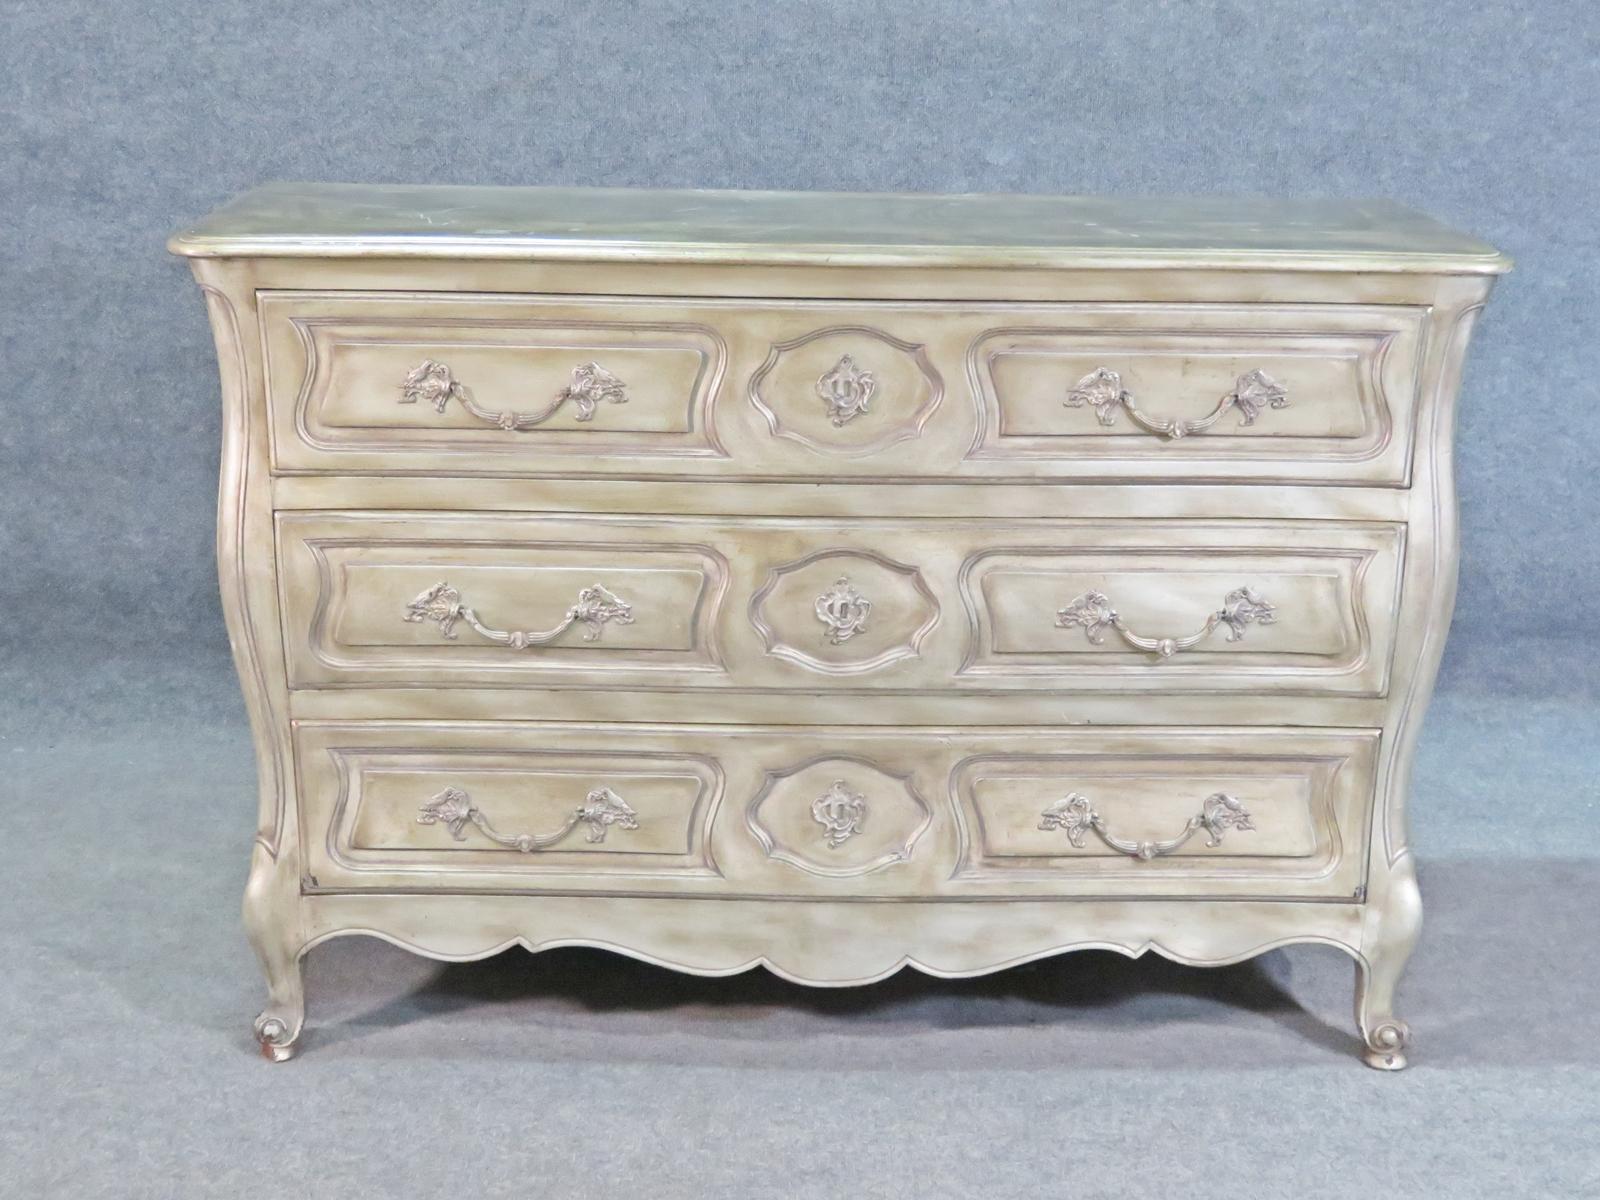 3 drawers. Silver leaf. French. Measures: 36 1/8